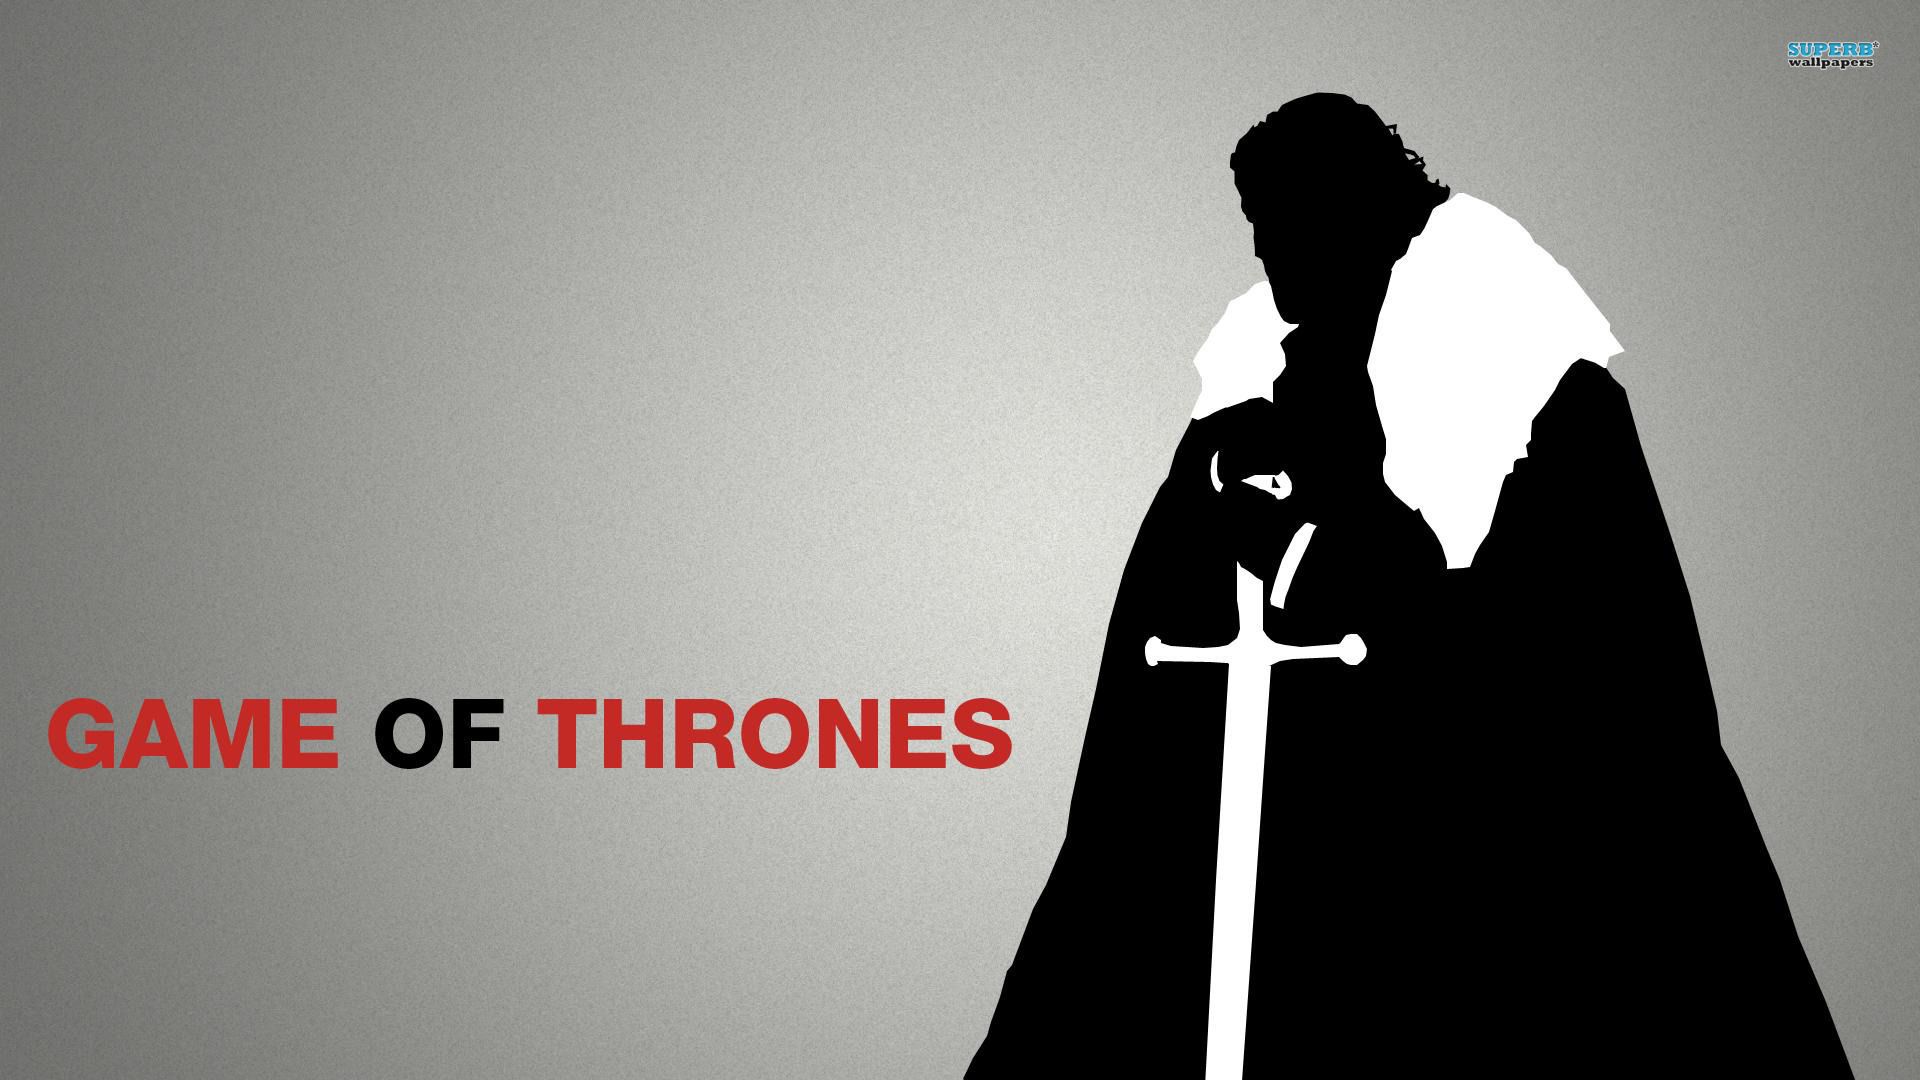 Game Of Thrones Logo Vector. GOT MAC party. Free desktop wallpaper, Game of thrones, Wallpaper